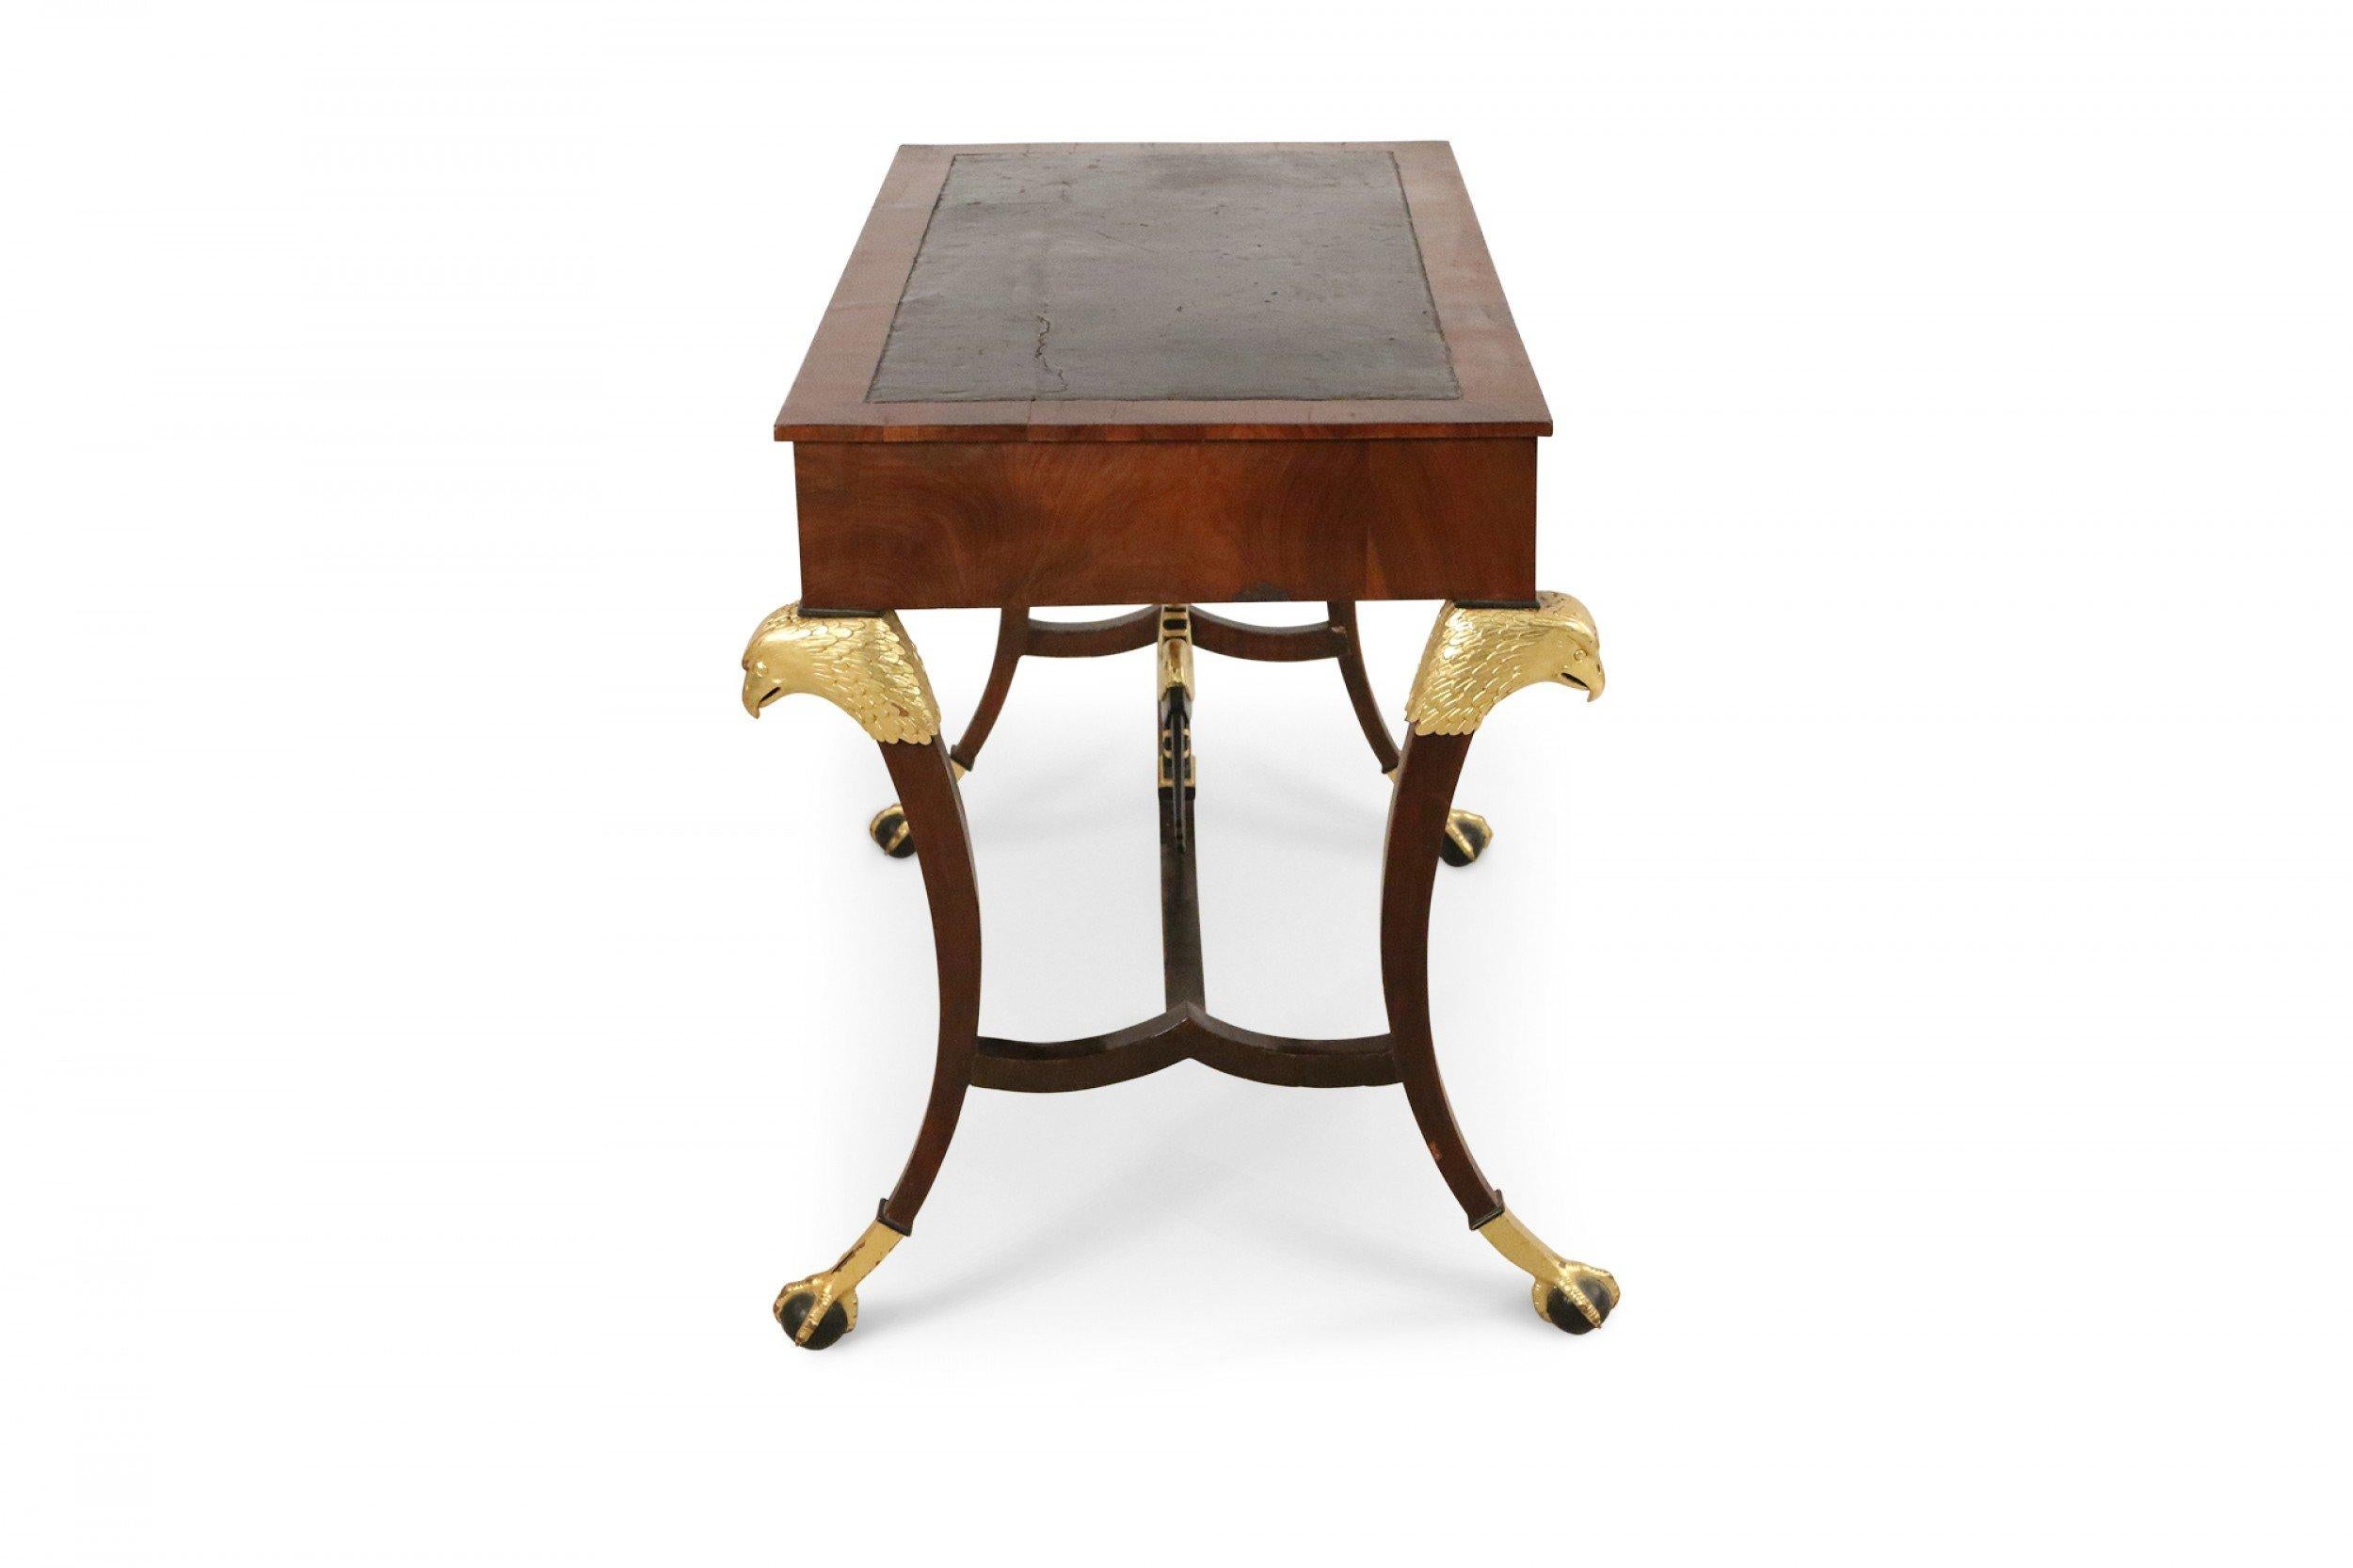 Russian (19th Century) mahogany desk with inset black leather top, key-locked drawer & pull out writing tray with a stretcher having a centered black & gilt eagle connecting 4 saber legs with gilt eagle heads and talon claw & ball feet.